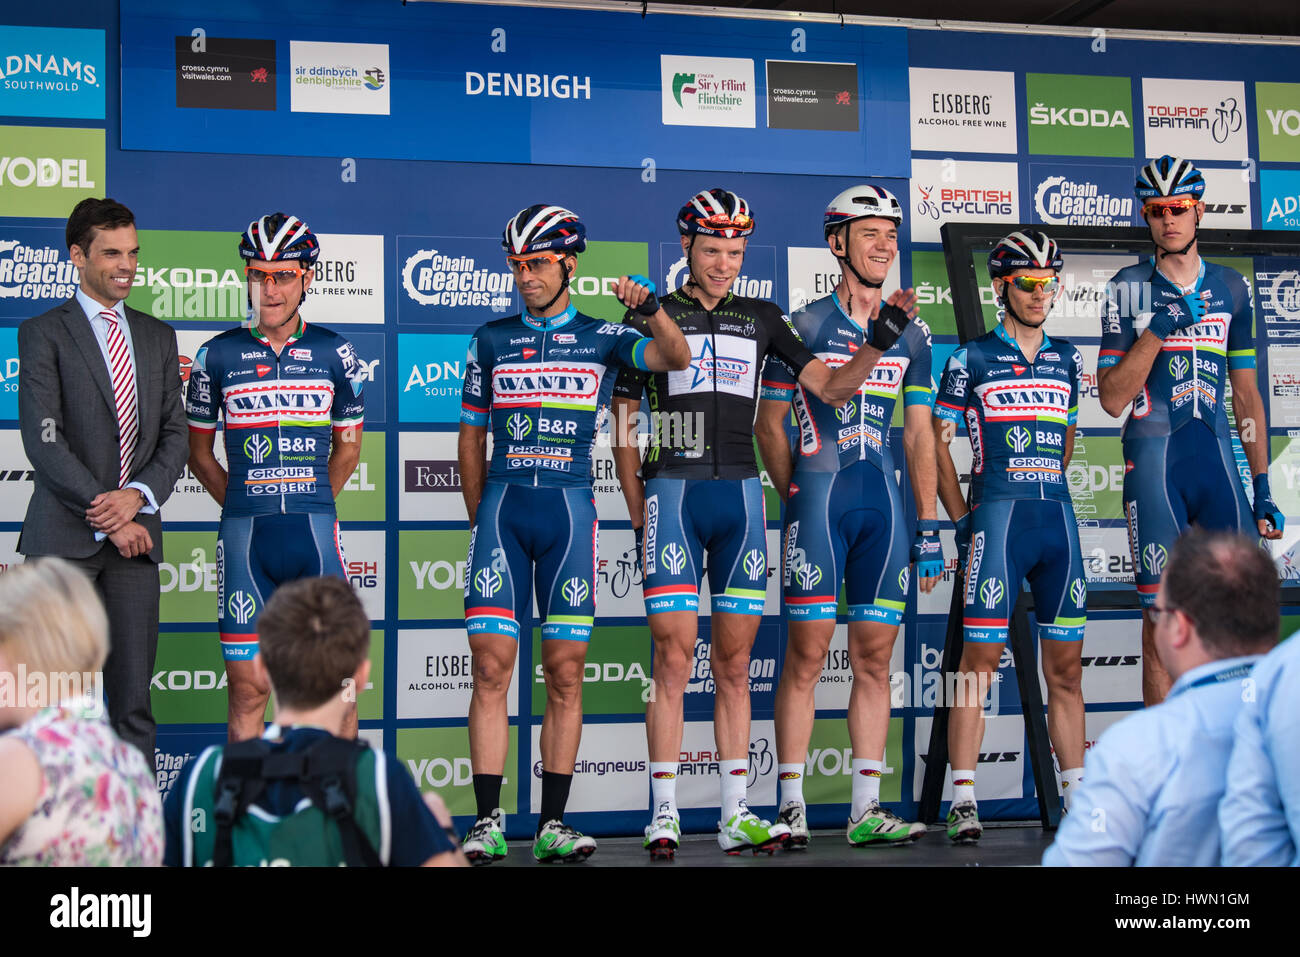 Team Wanty Groupe Gobert at Stage 4 of the Tour of Britain 2016 in Denbigh Stock Photo